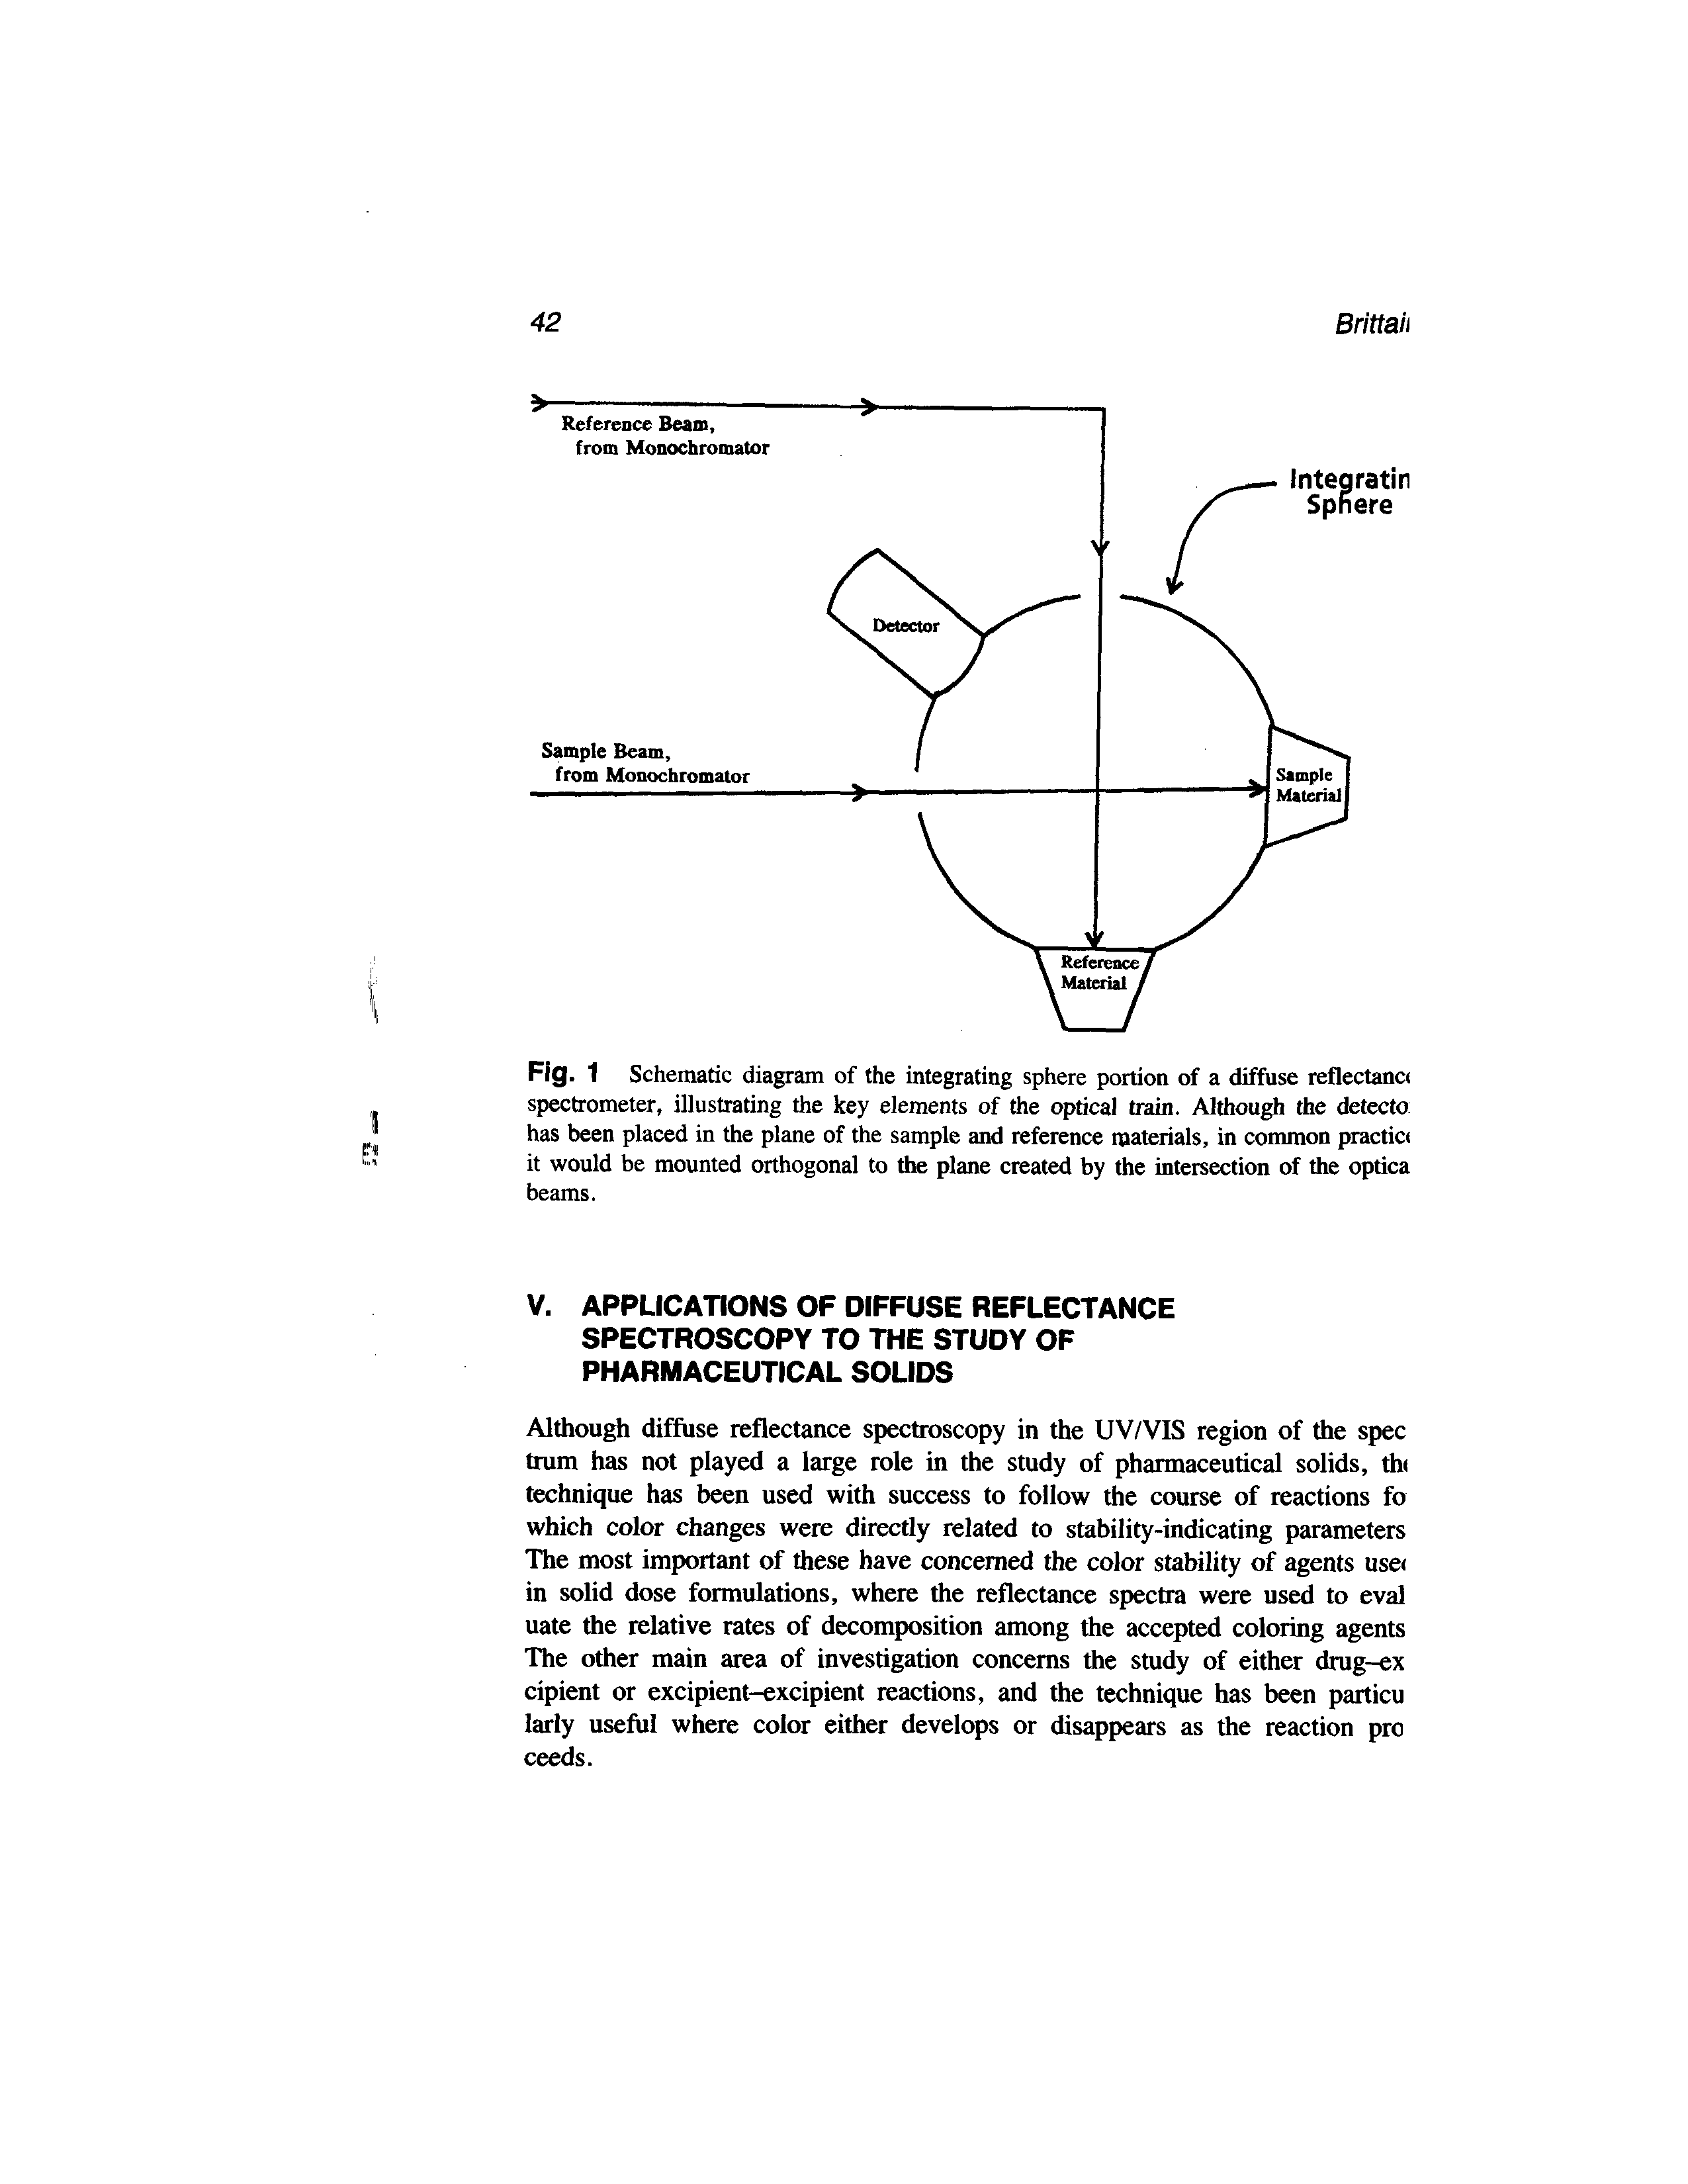 Fig. 1 Schematic diagram of the integrating sphere portion of a diffuse reflectance spectrometer, illustrating the key elements of the optical train. Although the detecto has been placed in the plane of the sample and reference materials, in common practice it would be mounted orthogonal to the plane created by the intersection of the optica beams.